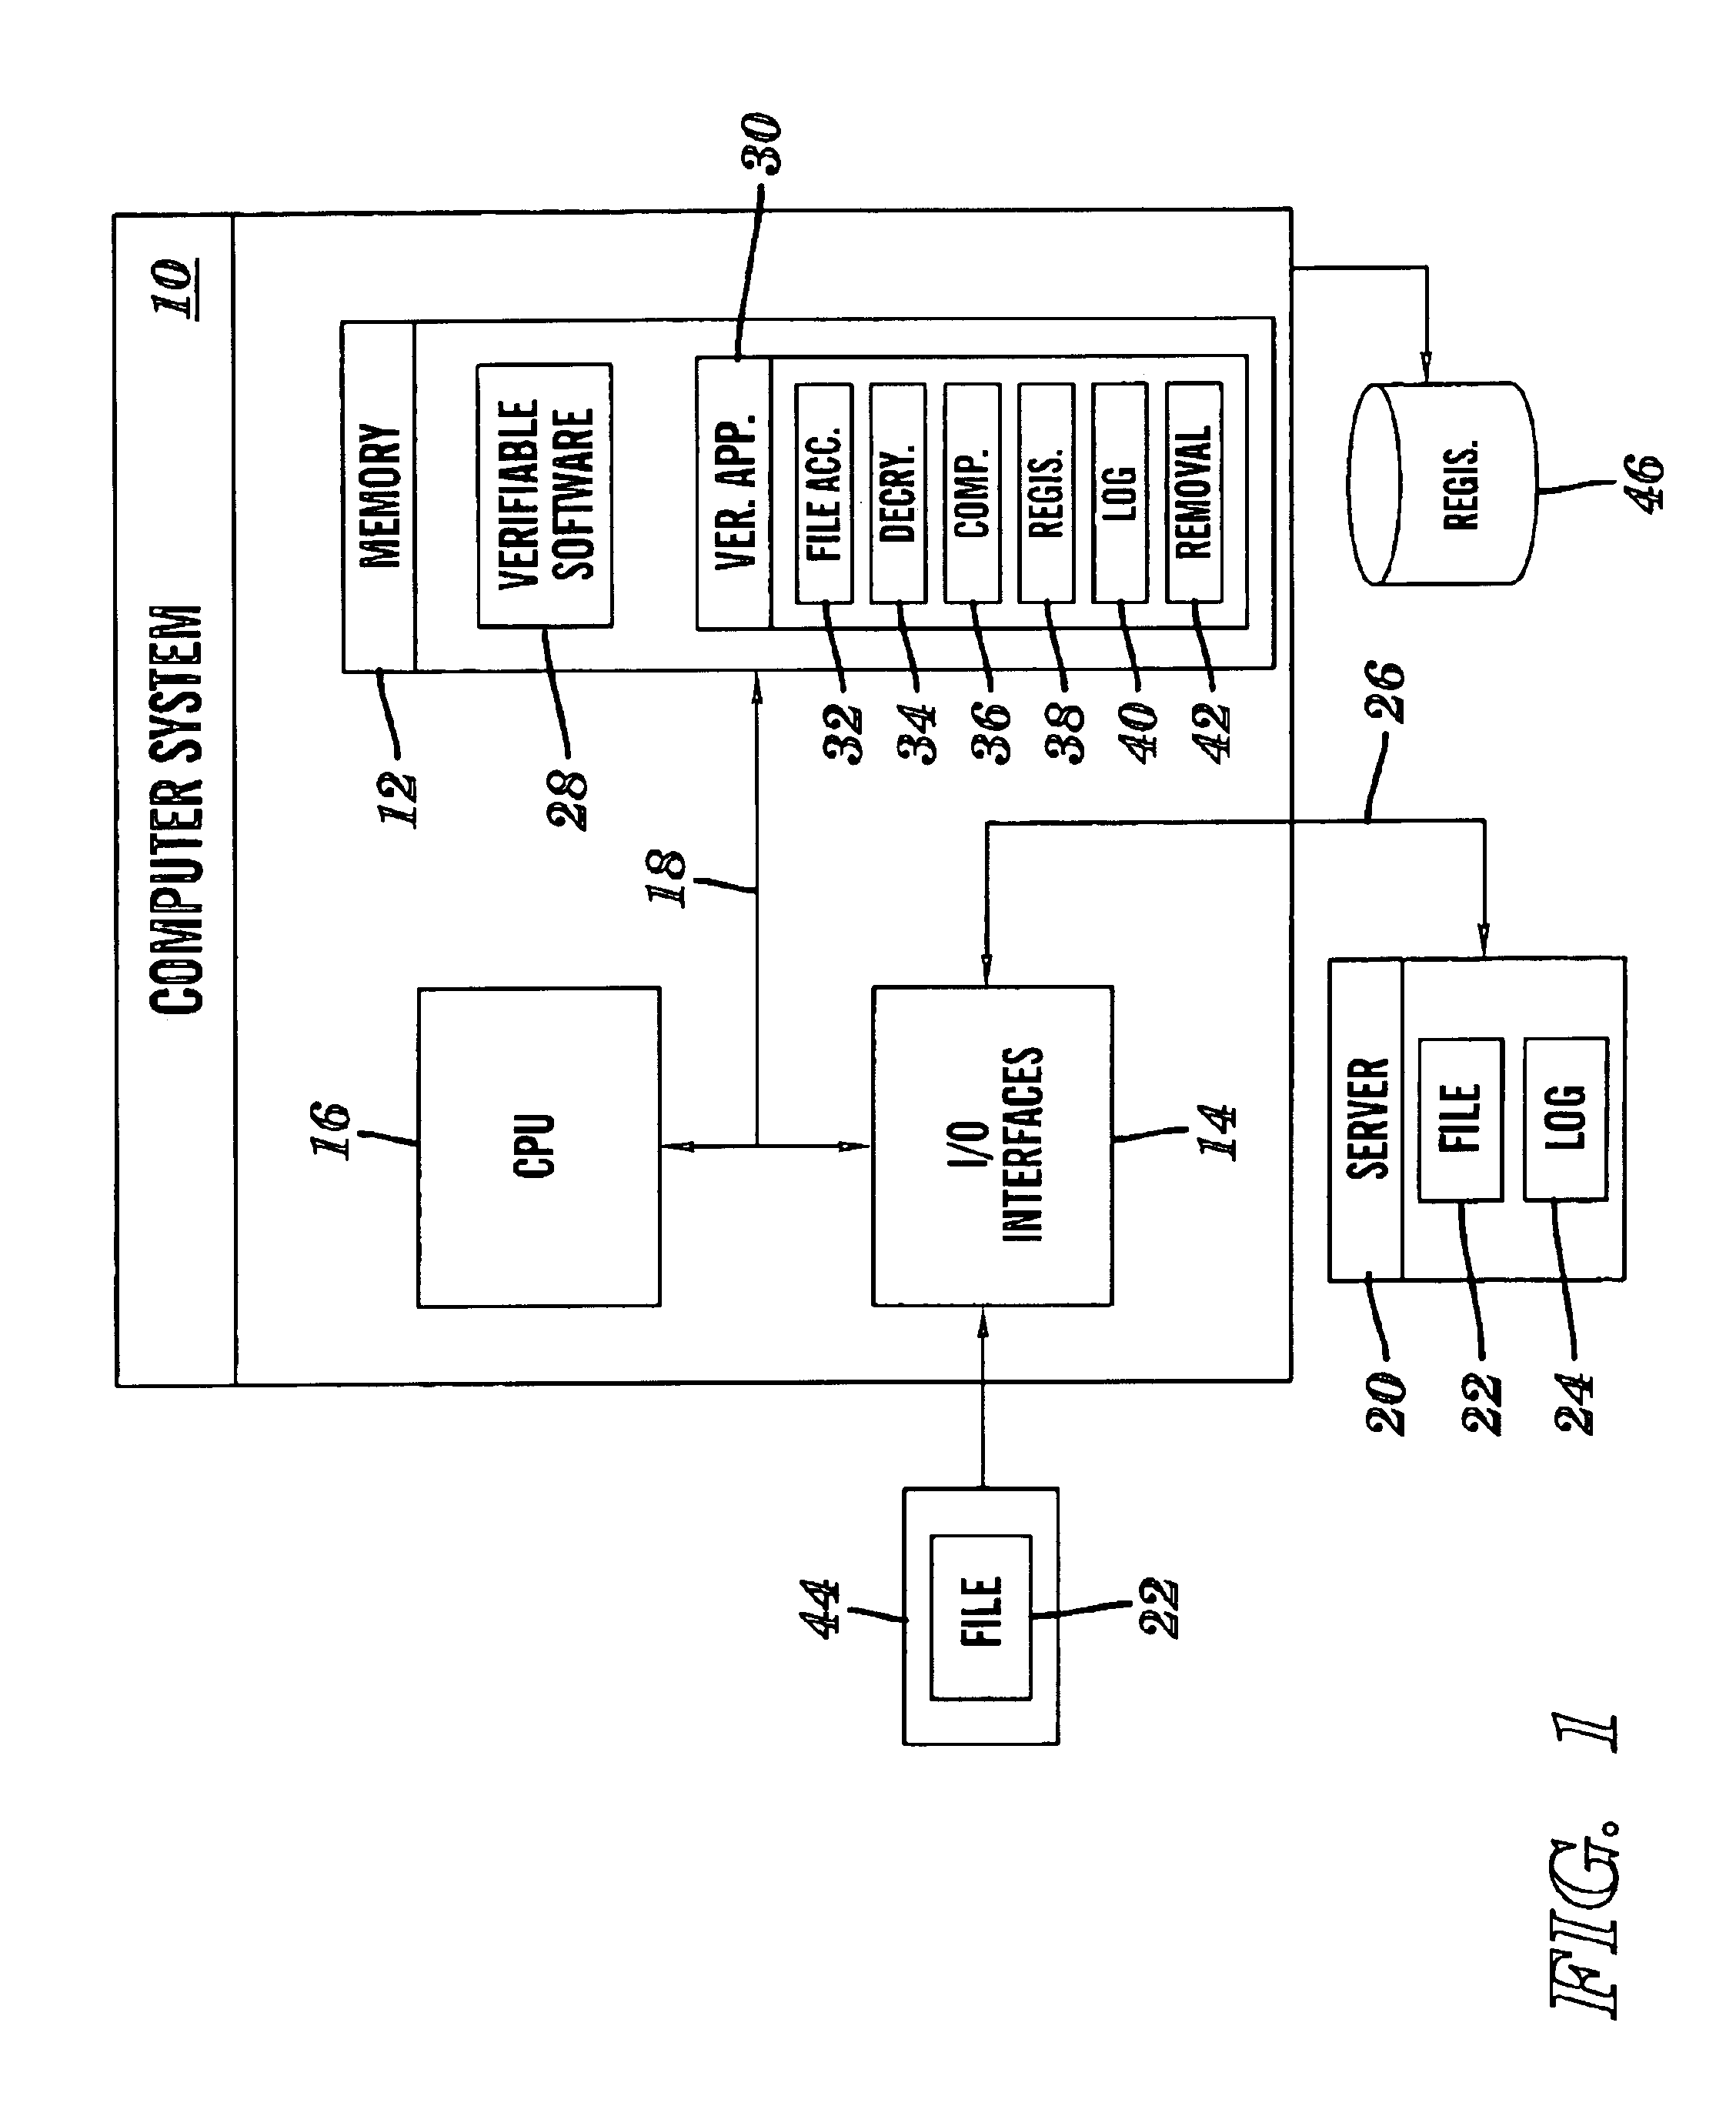 Method and system verifying product licenses using hardware and product identifications